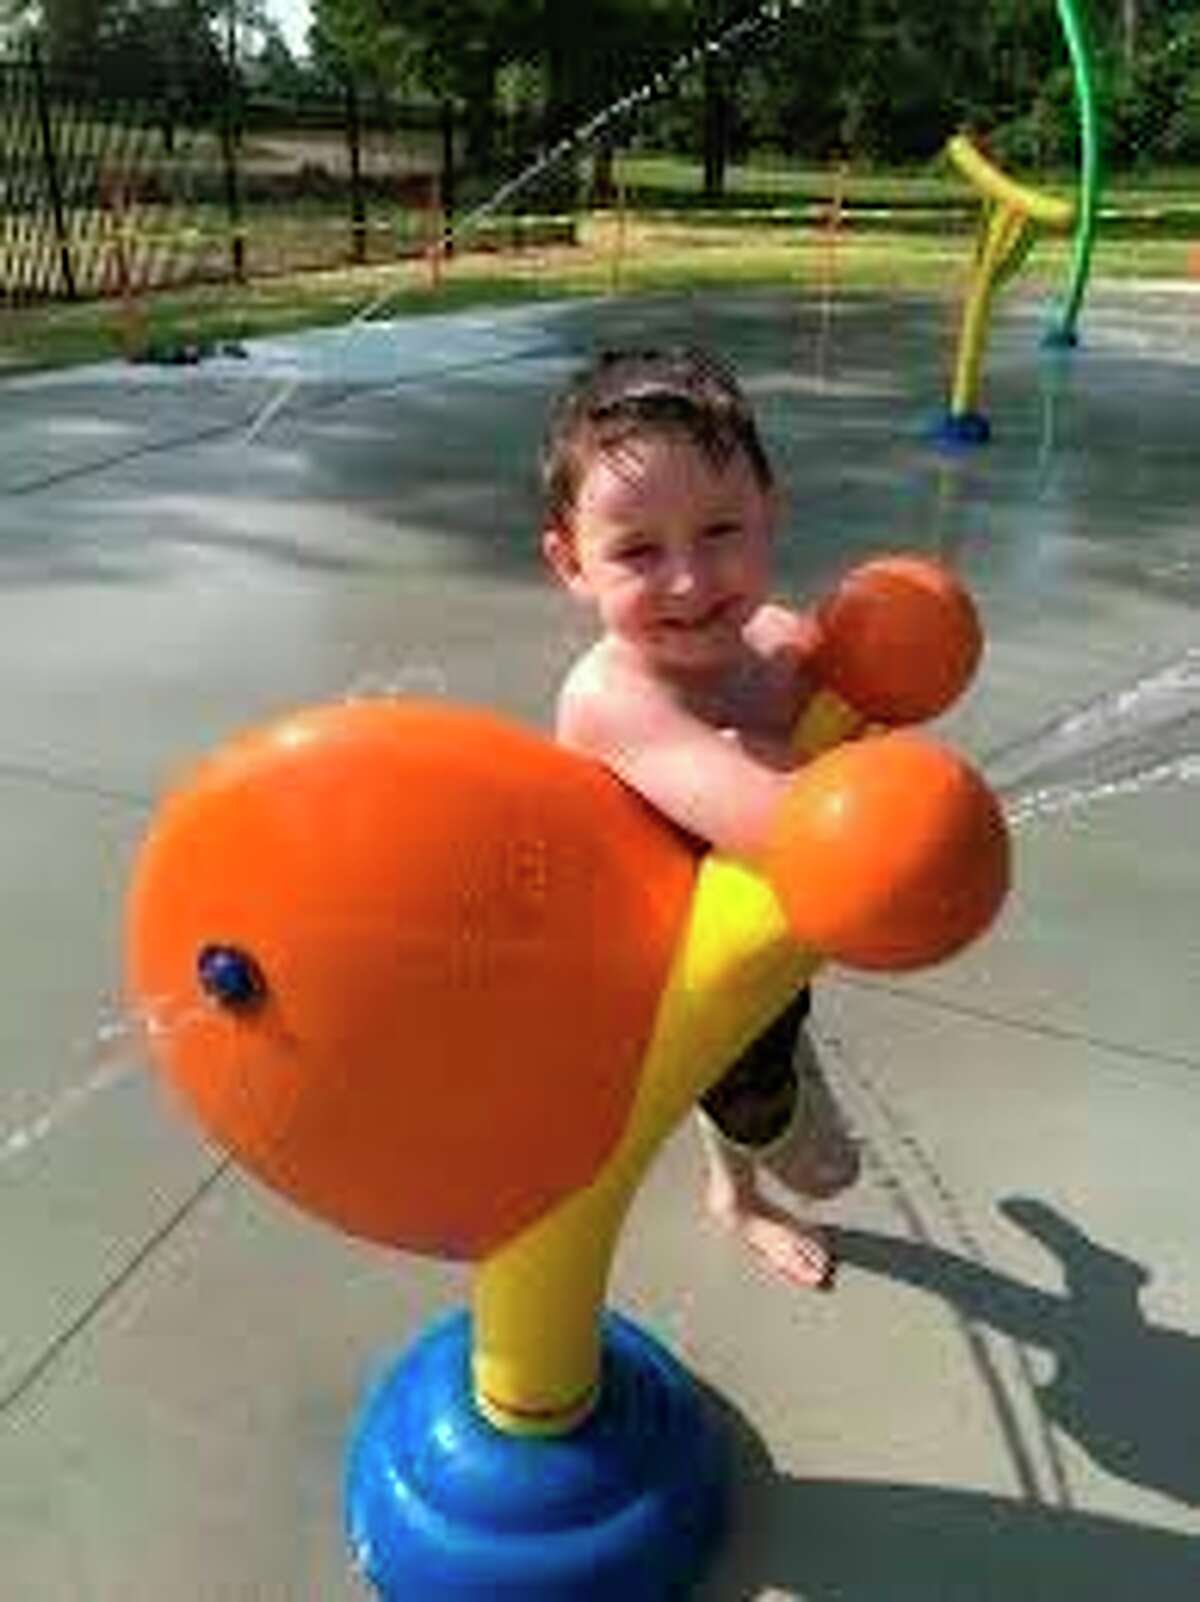 Evart residents will soon be able to cool off at the splash pad. The Evart city council voted to allow the splash to open once the proper safety procedures are approved by local health officials and put into place at the facility. (Submitted photo)